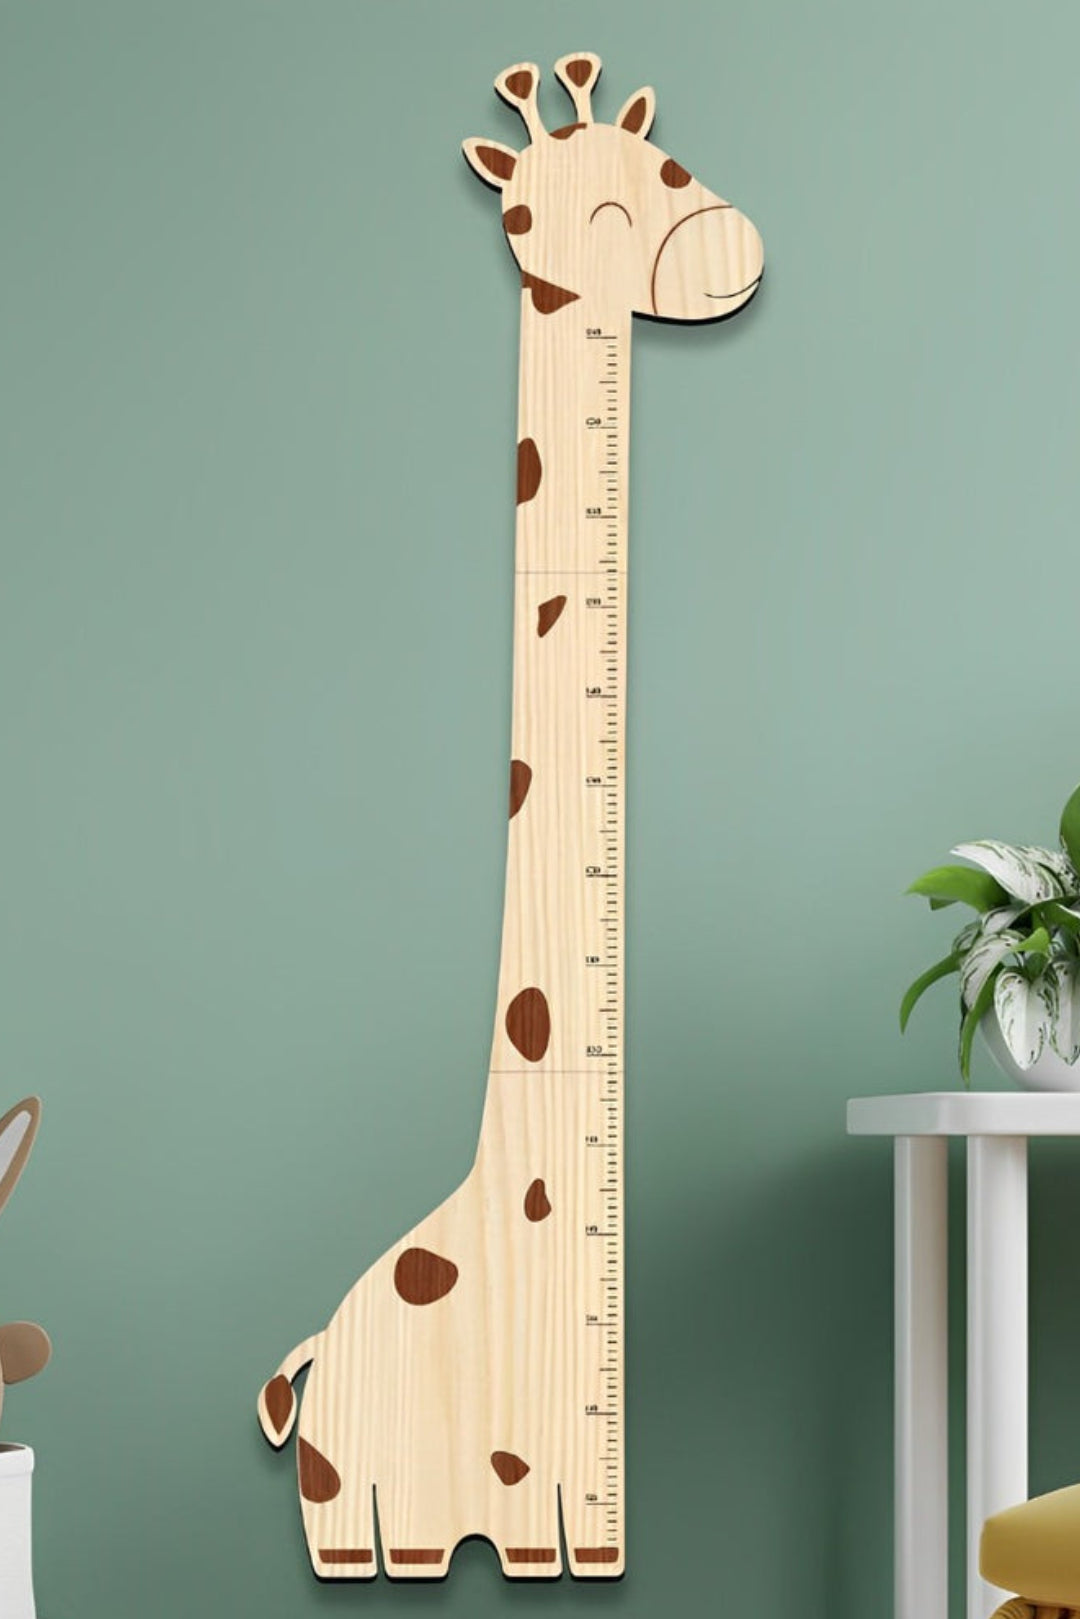 Personalized Wooden Baby Height Growth Chart Ruler - Giraffe